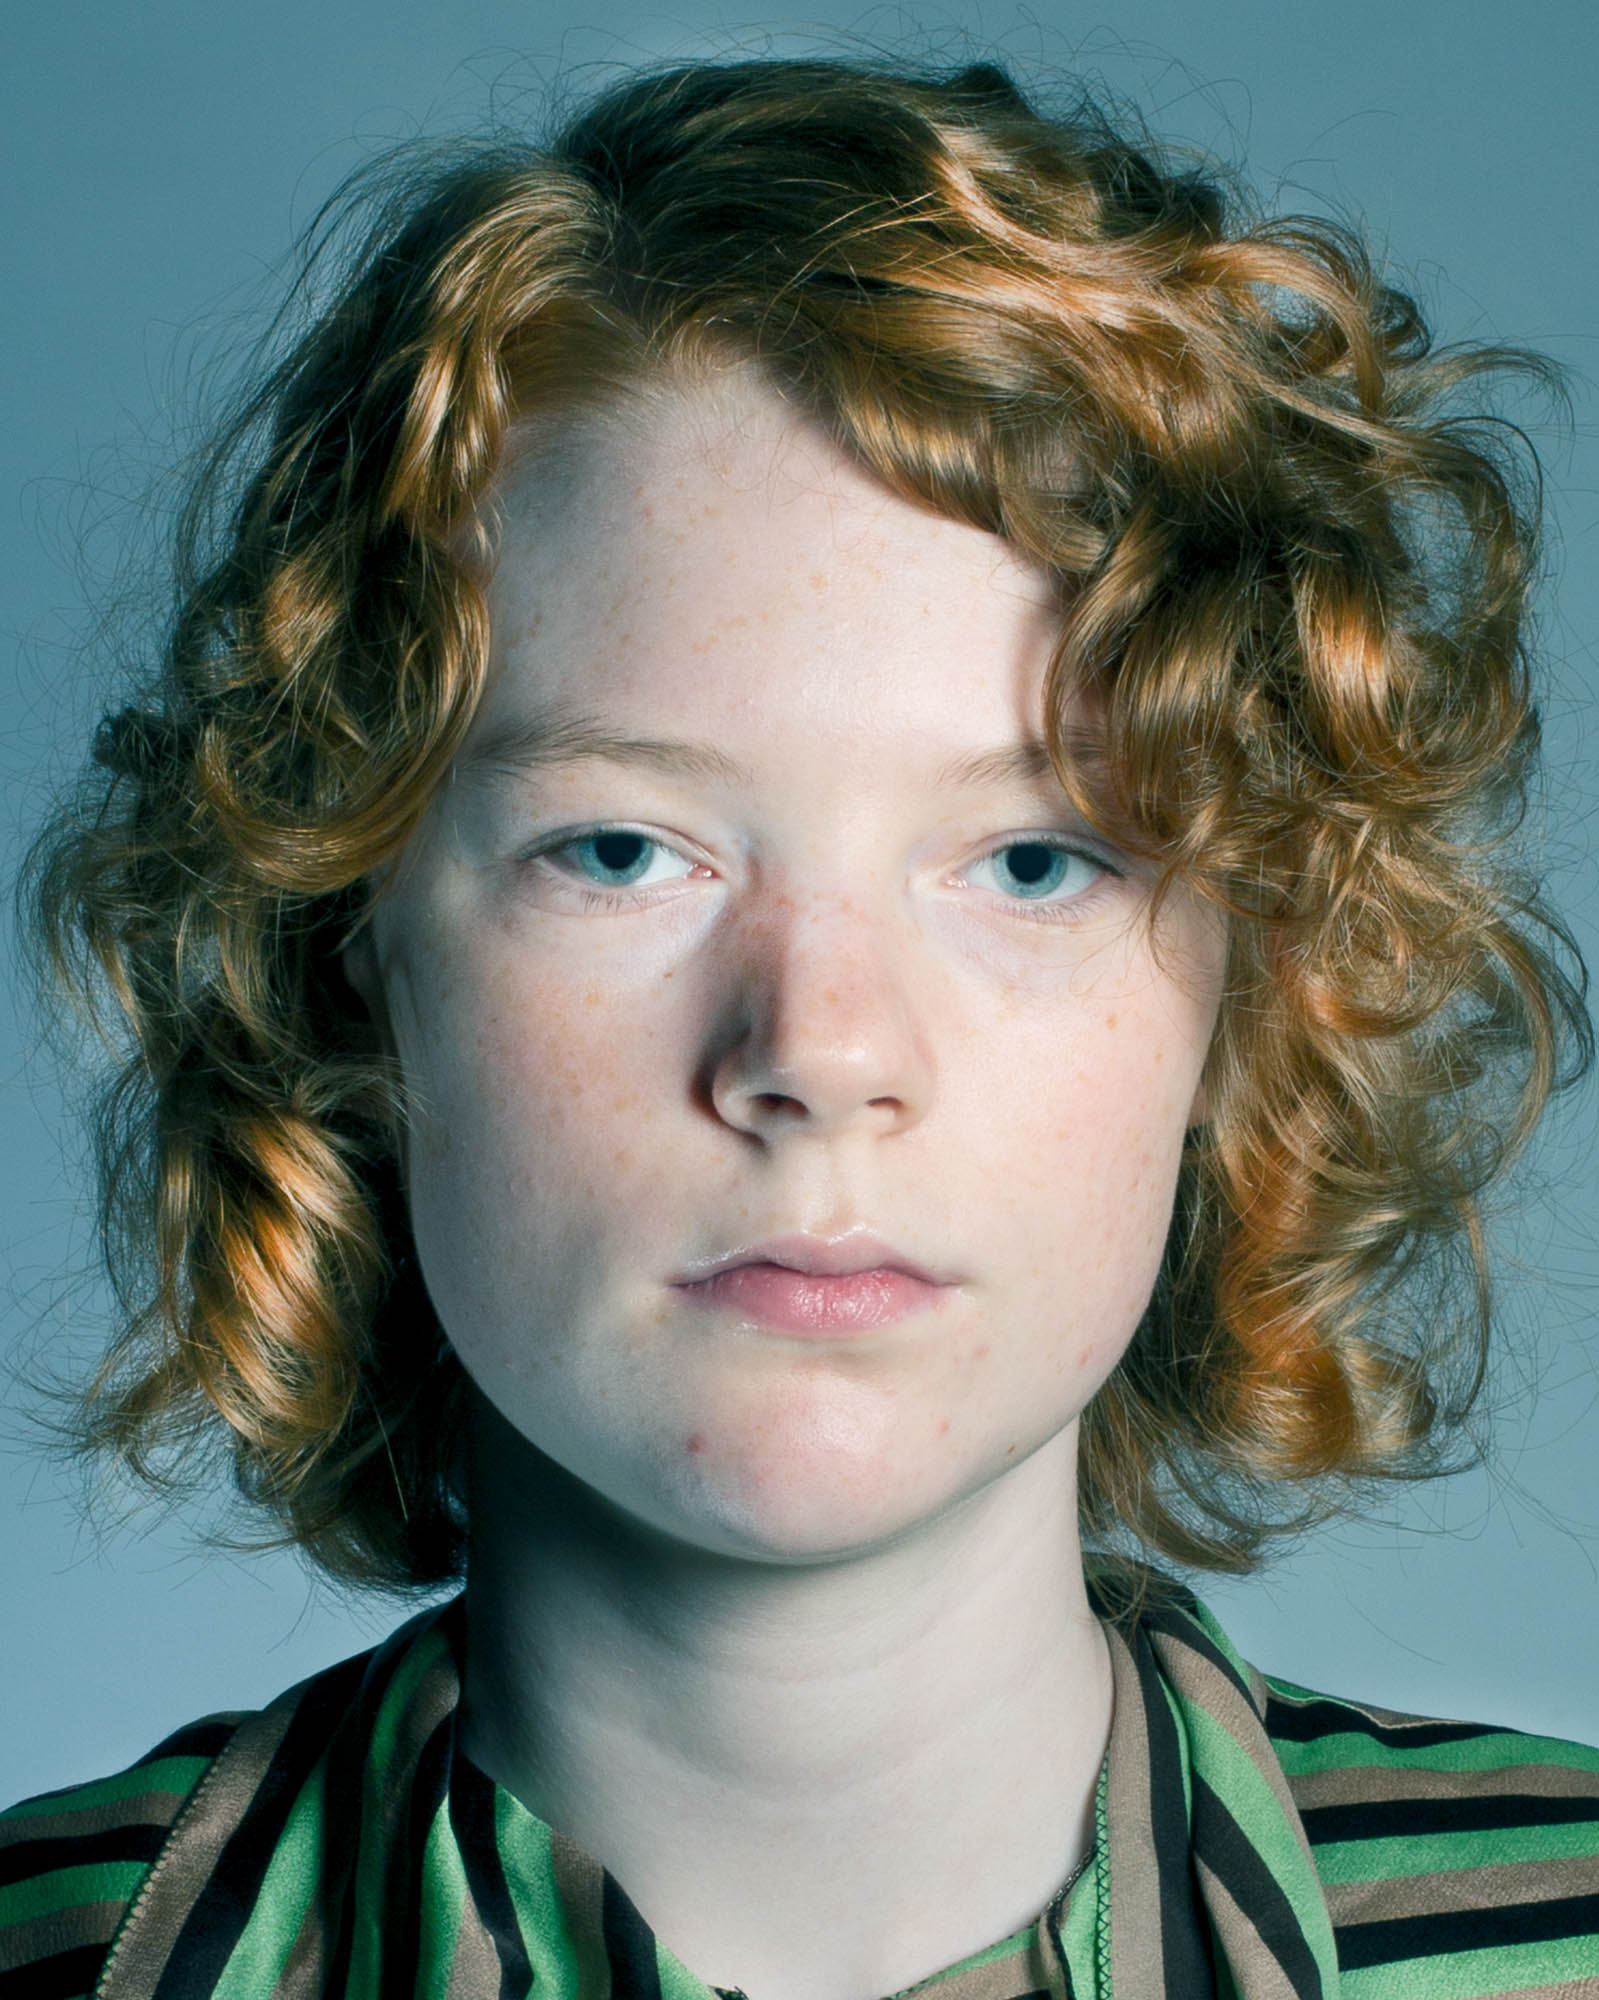 a portrait of a red haired person in a stripy shirt against a pale blue backdrop